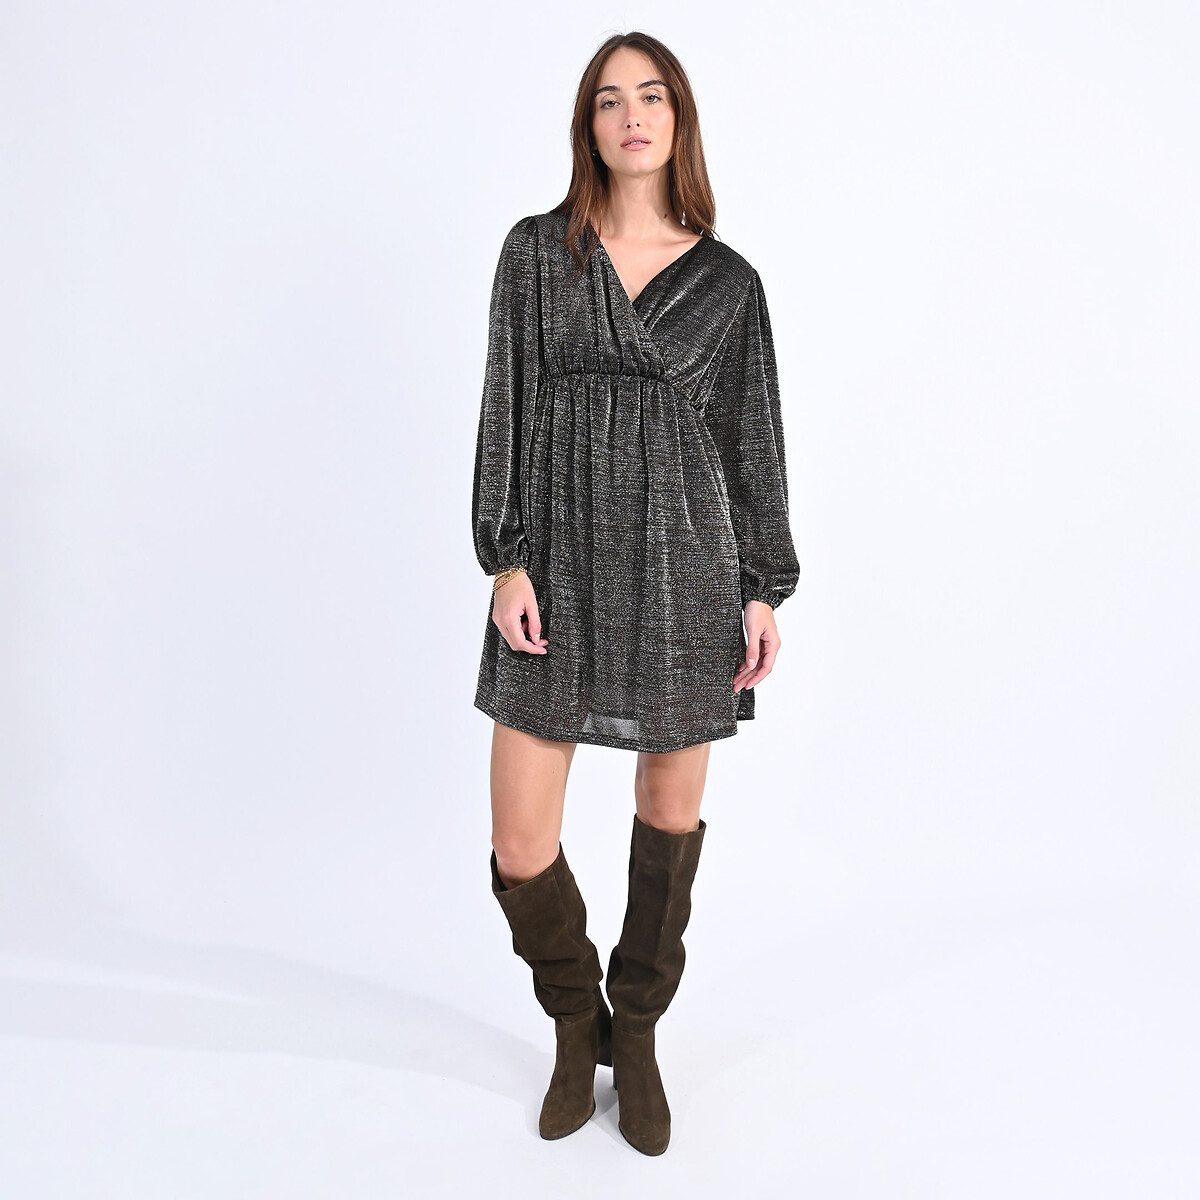 Crossover Neck Dress with Long Sleeves